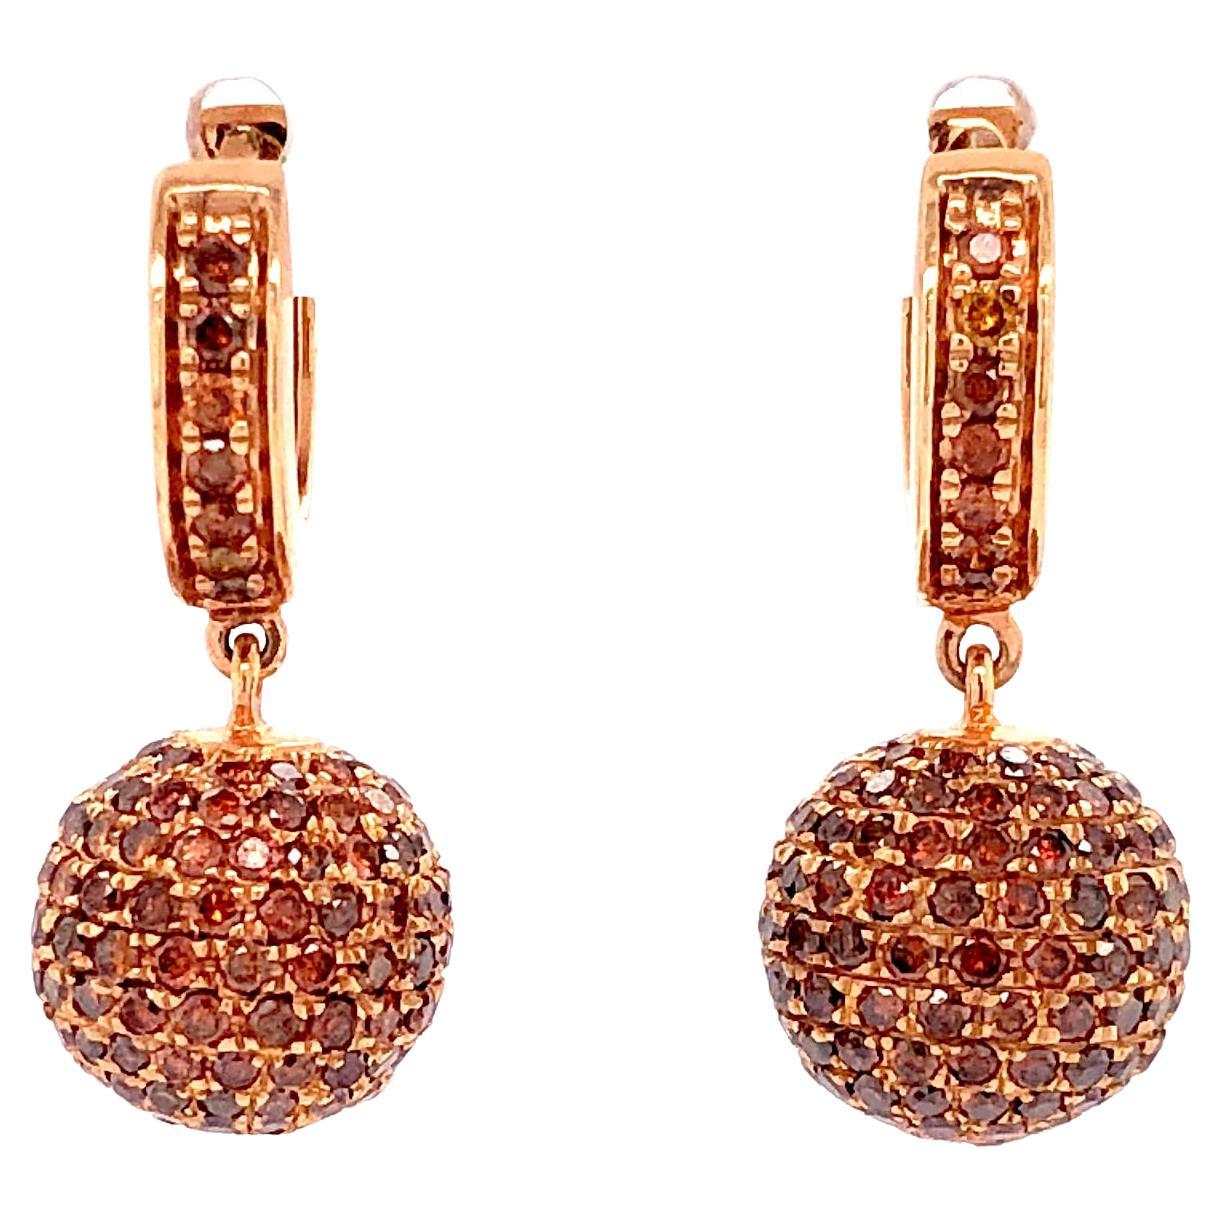 Pave Brown Diamond Ball Earrings Made in 18k Rose Gold For Sale